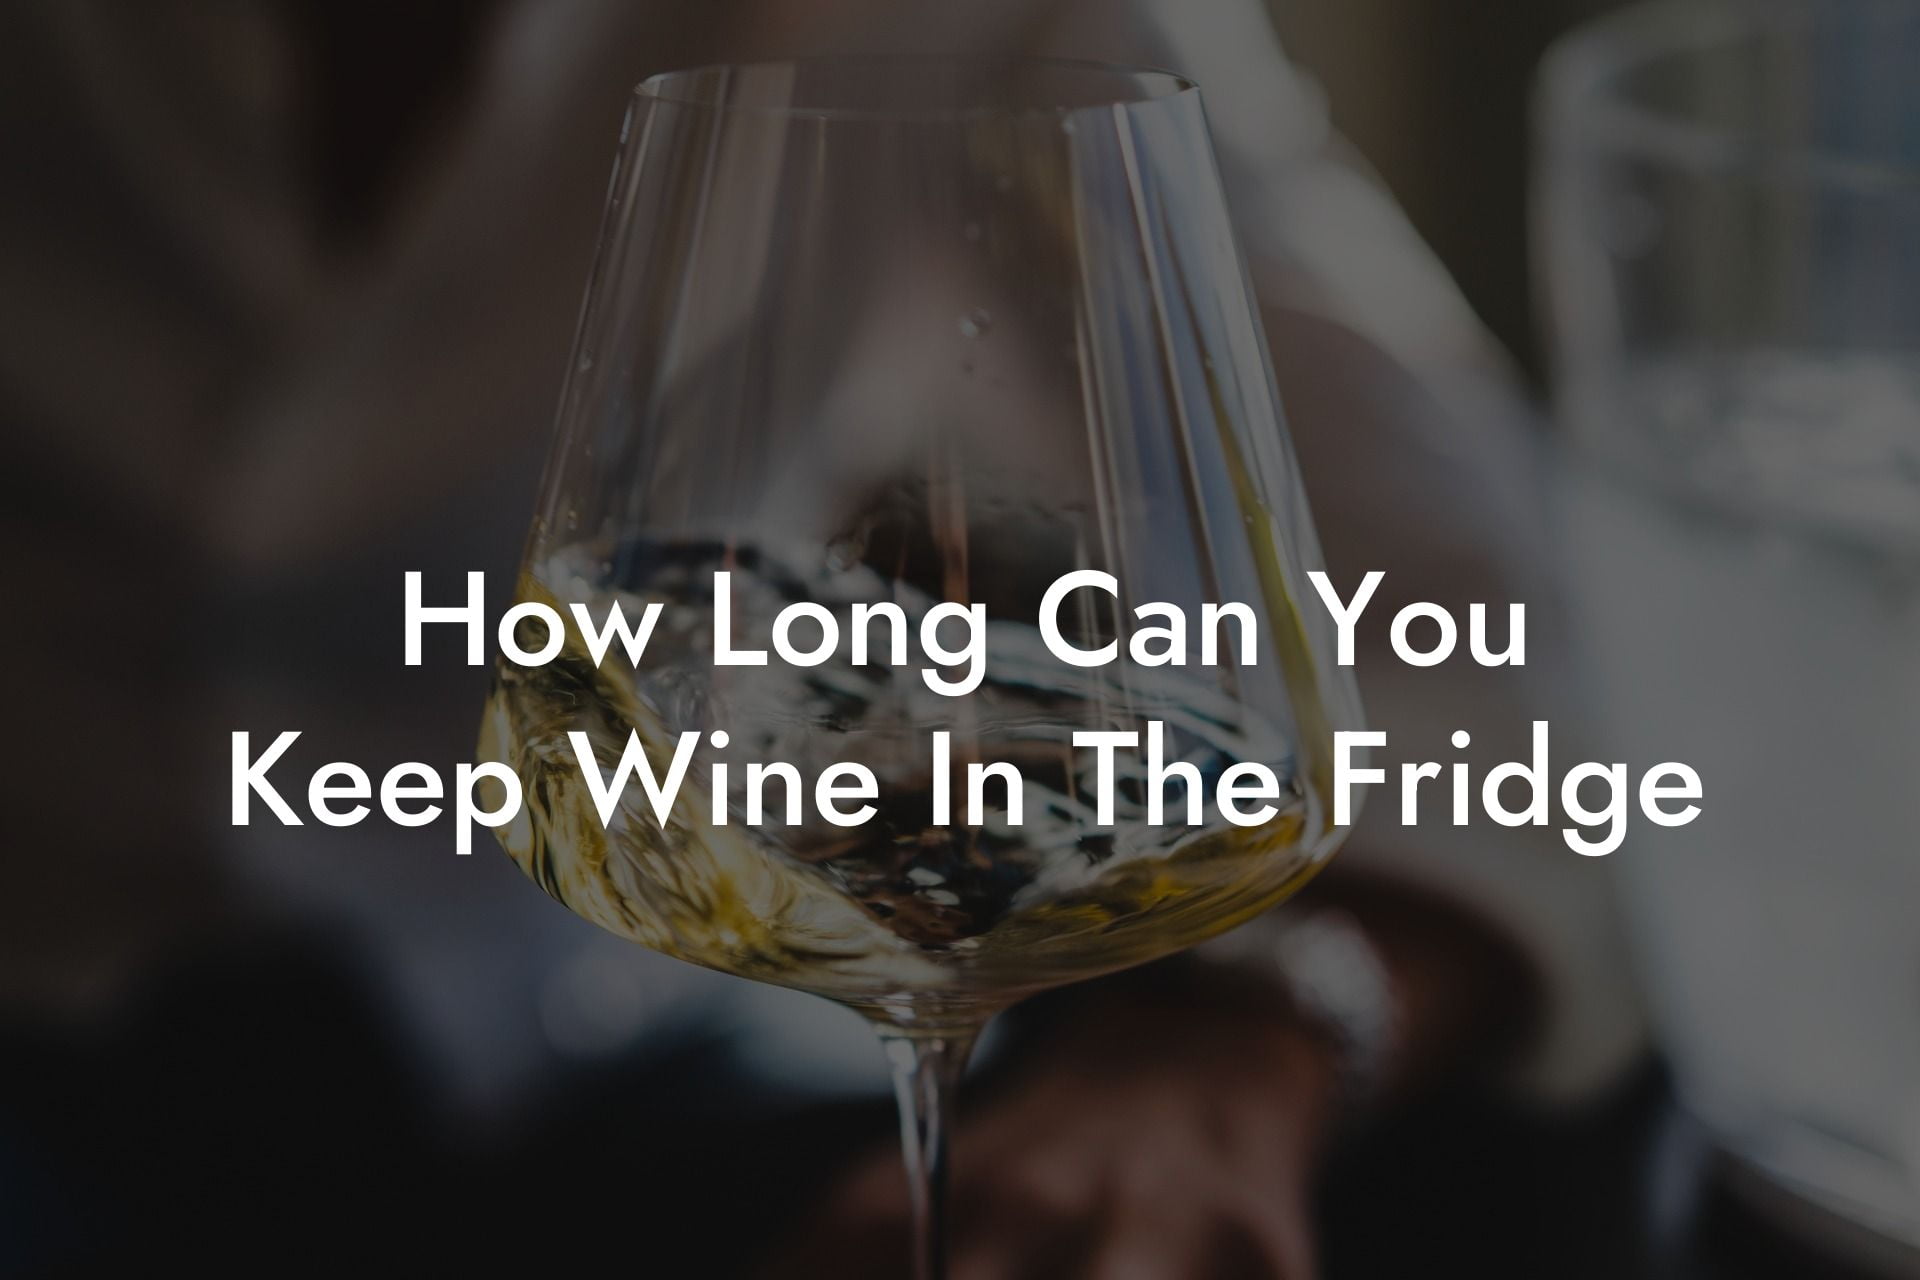 How Long Can You Keep Wine In The Fridge